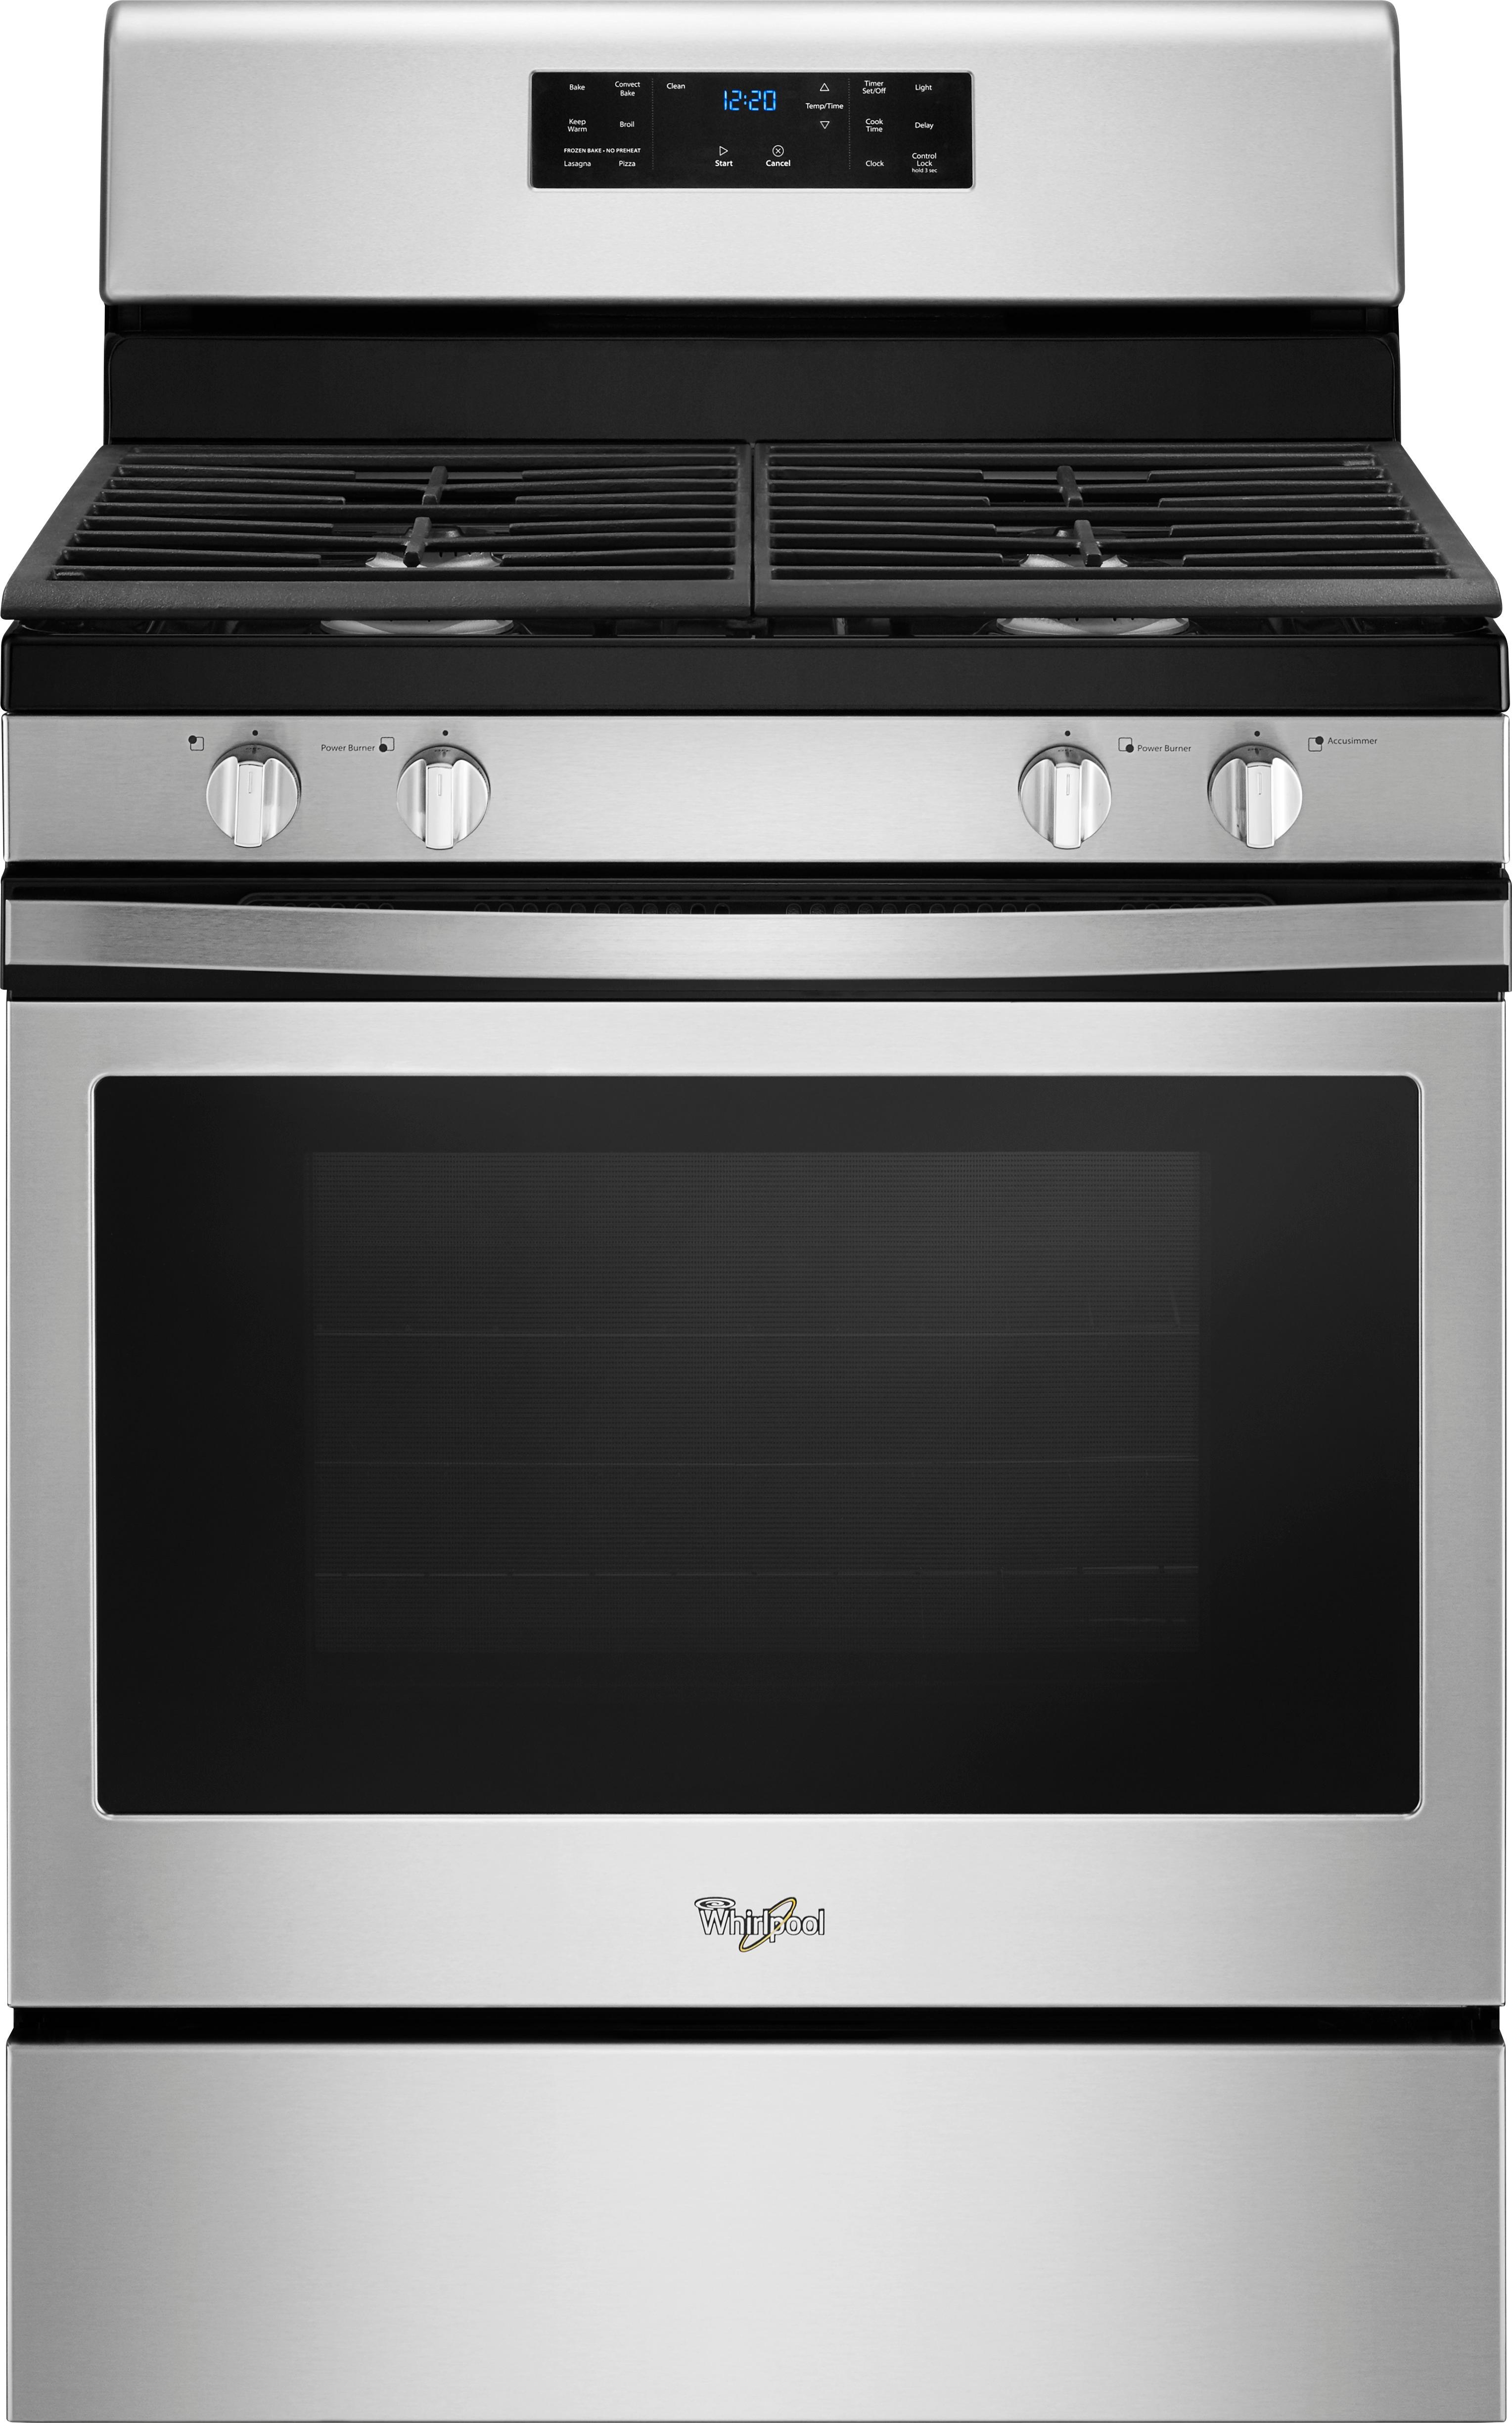 Whirlpool - 5.0 Cu. Ft. Self-Cleaning Freestanding Gas Convection Range Stainless Steel Self Cleaning Gas Range